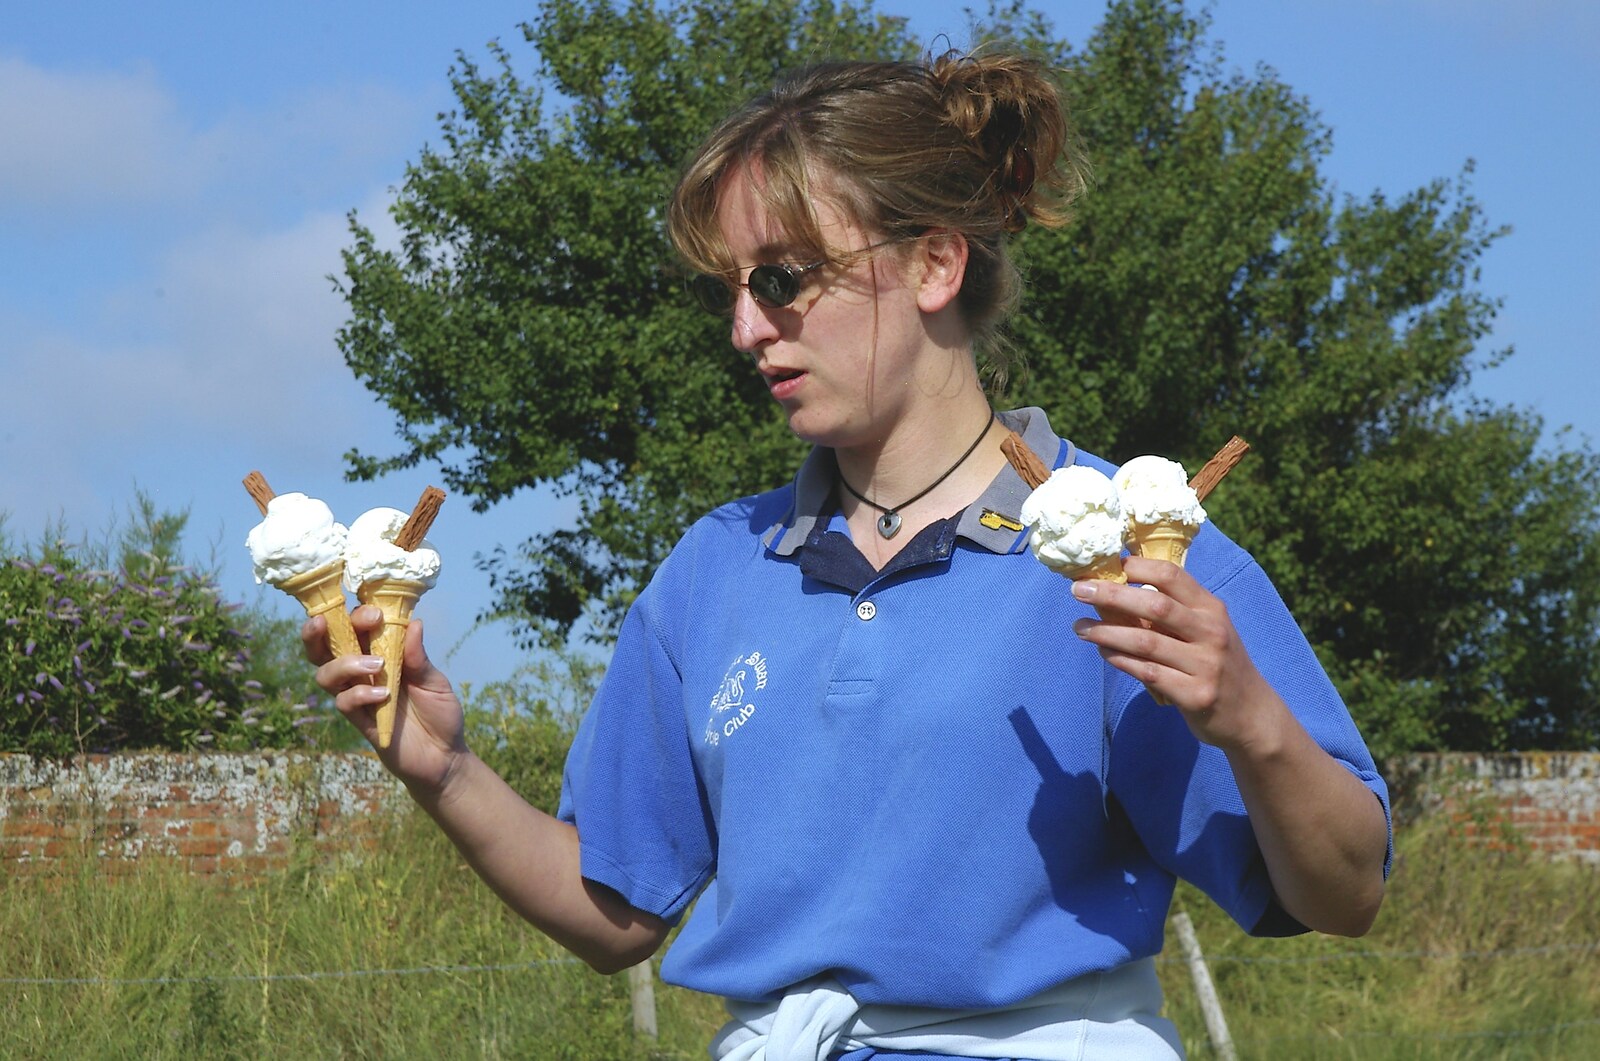 Suey's got the ice creams from The BSCC Charity Bike Ride, Orford, Suffolk - 15th July 2006